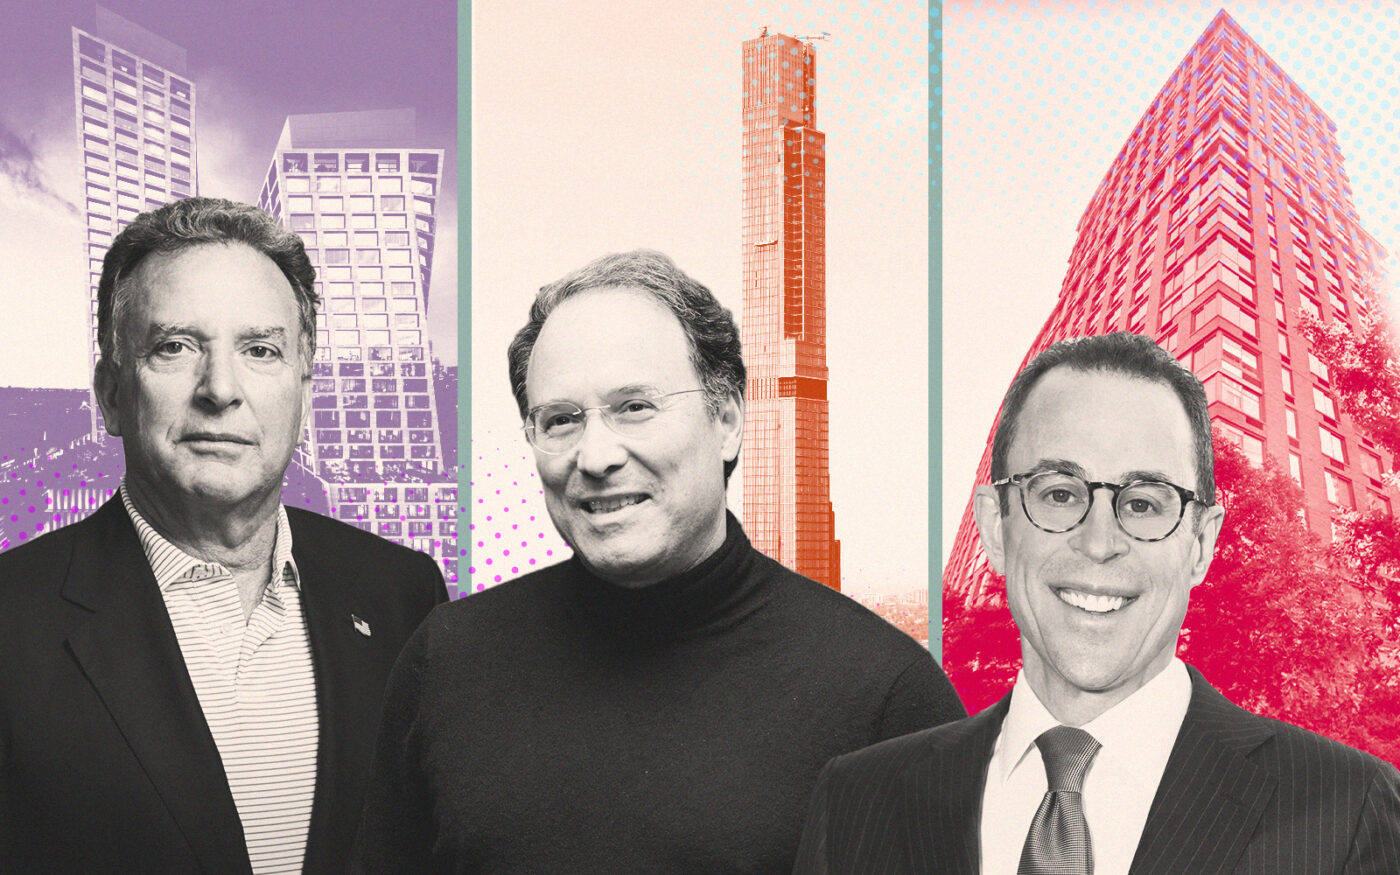 Witkoff's Steve Witkoff, Extell's Gary Barnett and Related's Jeff Blau with One High Line, Central Park Tower and 210 Warren Street